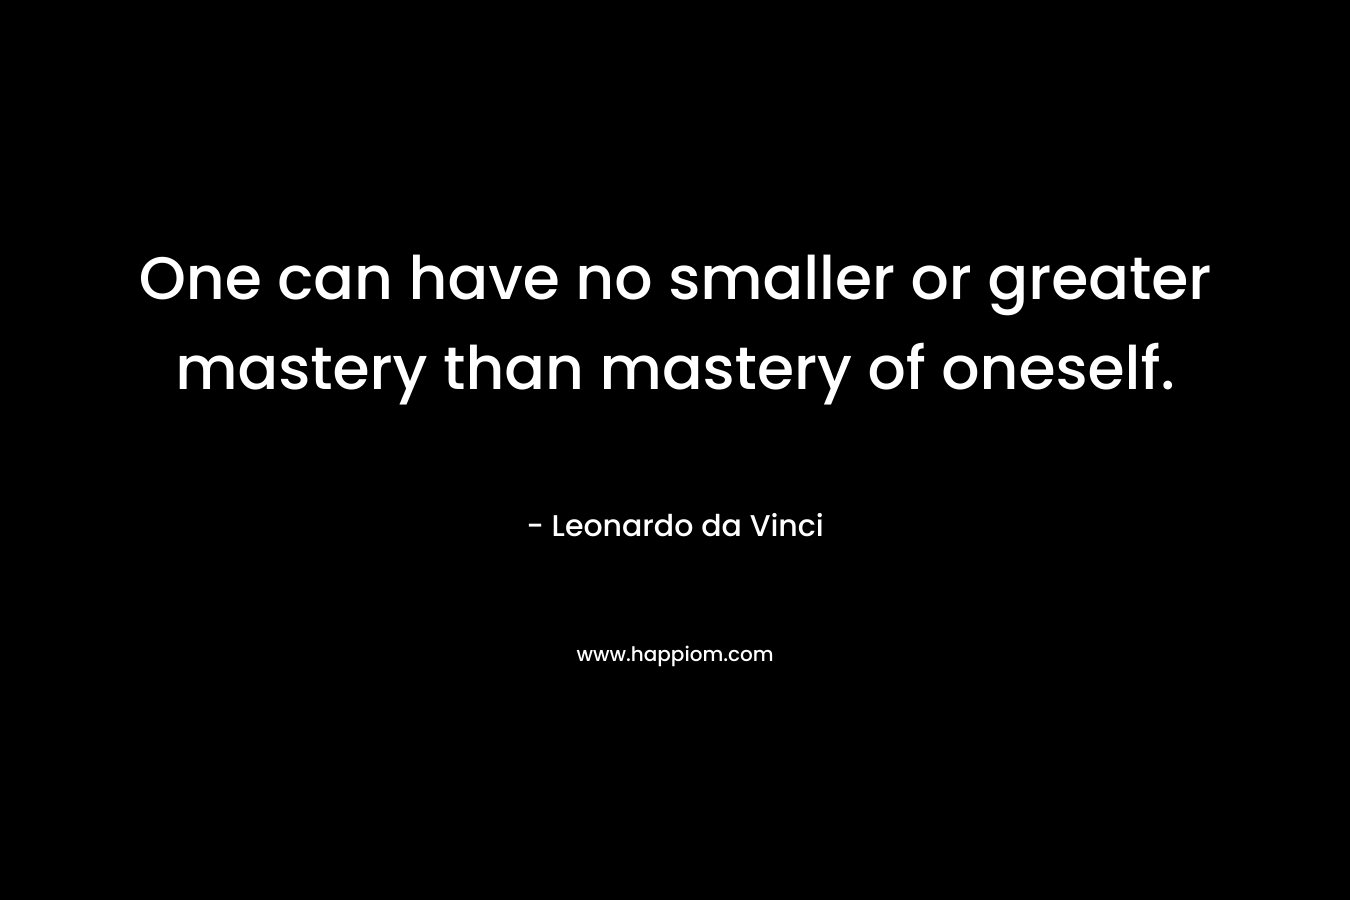 One can have no smaller or greater mastery than mastery of oneself.